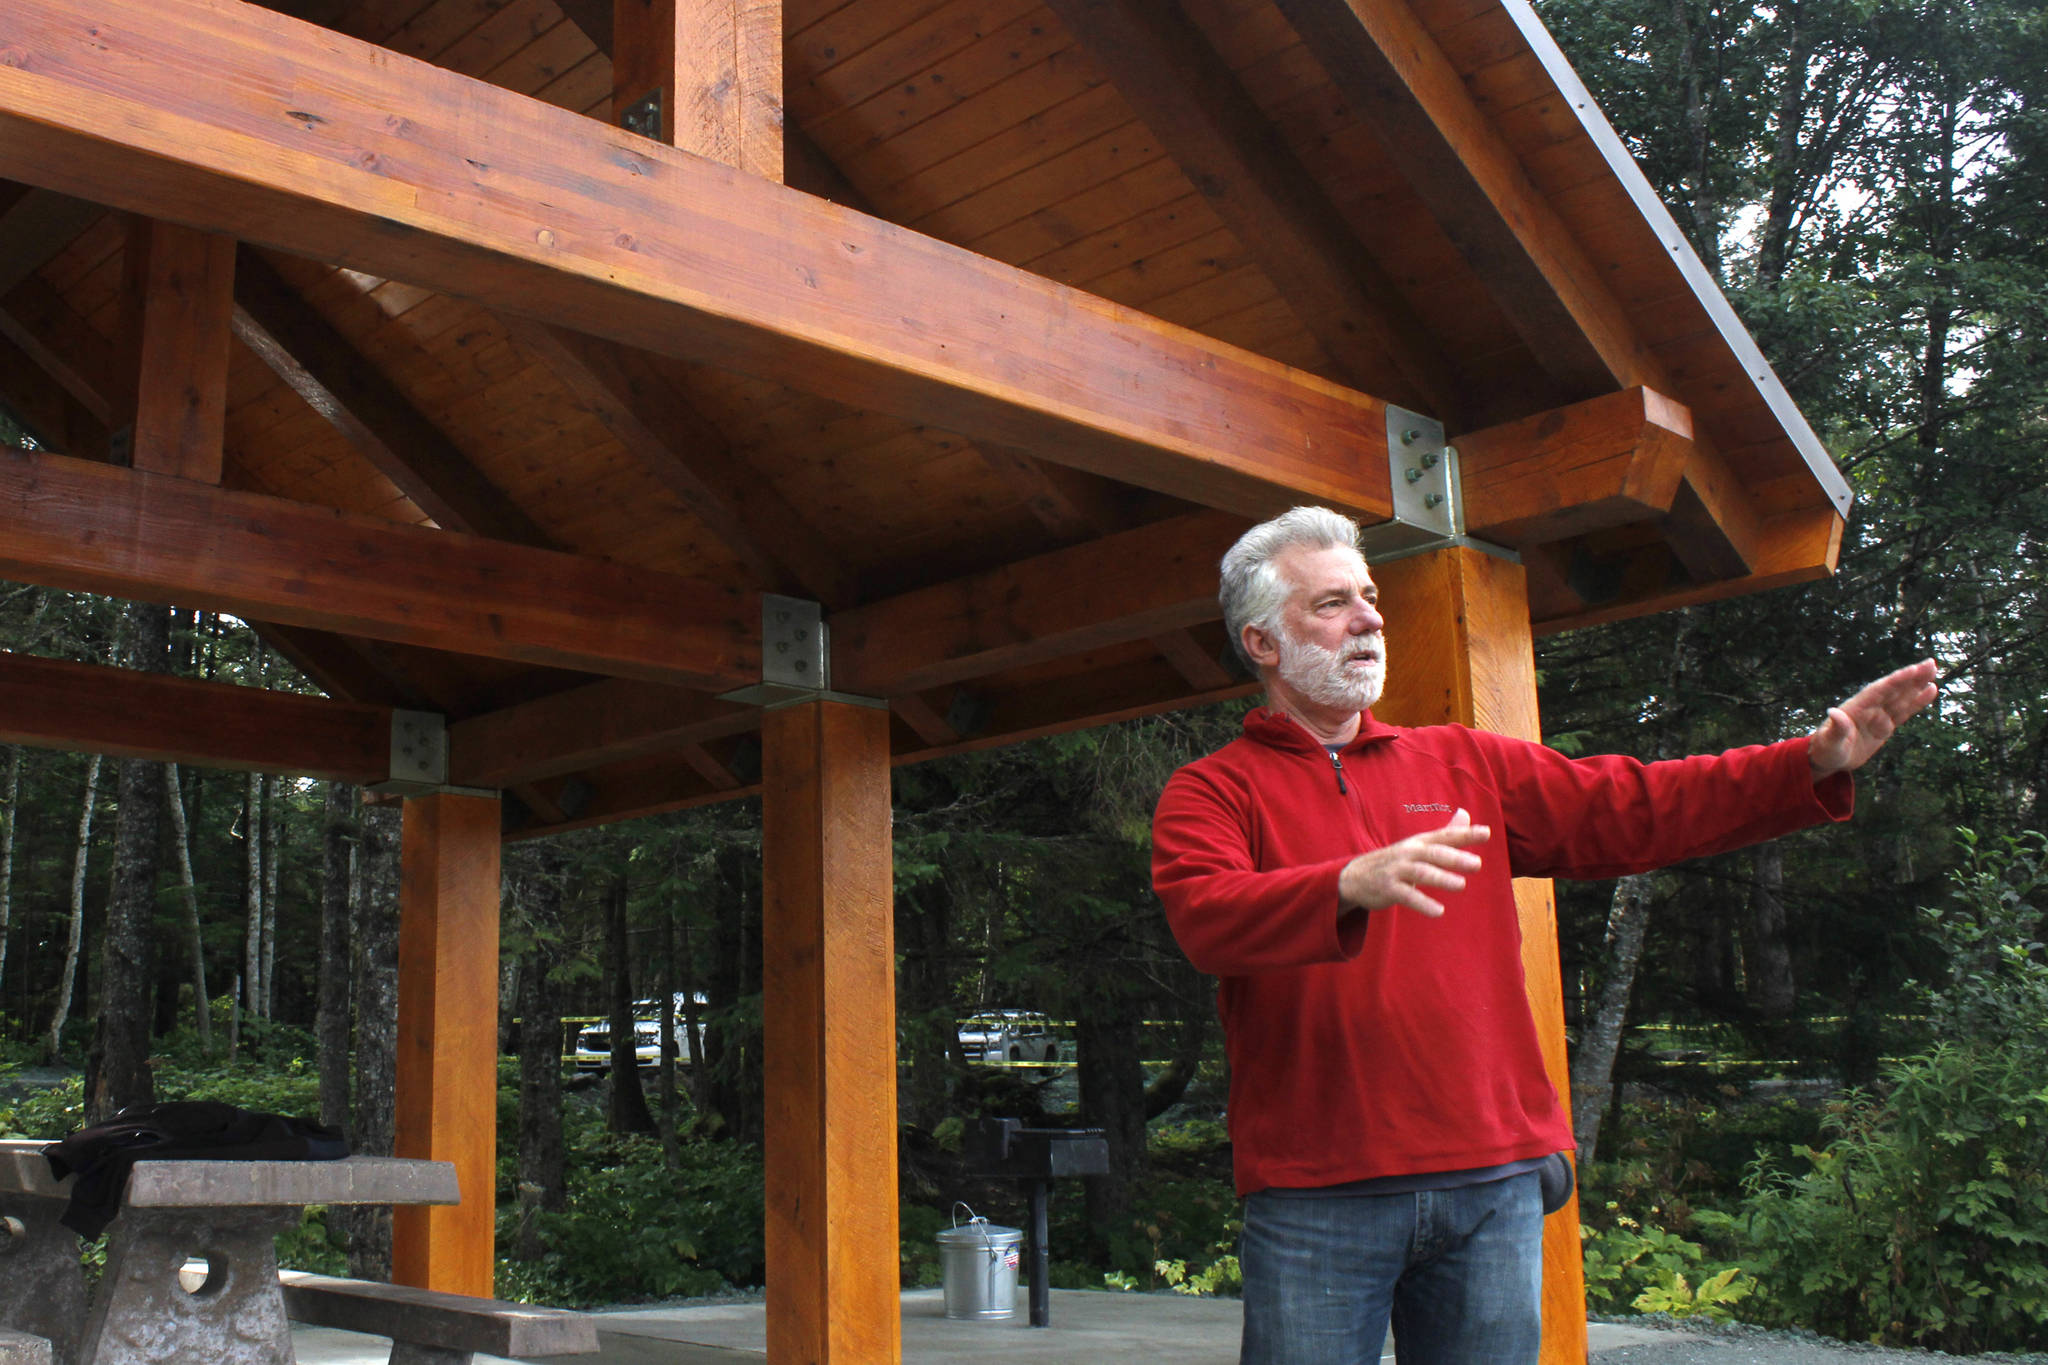 Marc Ramonda, development recreation manager for the Juneau Ranger District, speaks about renovations at Lena Beach Recreation Area on Saturday, Sept. 1, 2018. The area opened this weekend after two new shelters were installed, among other improvements. (Alex McCarthy | Juneau Empire)